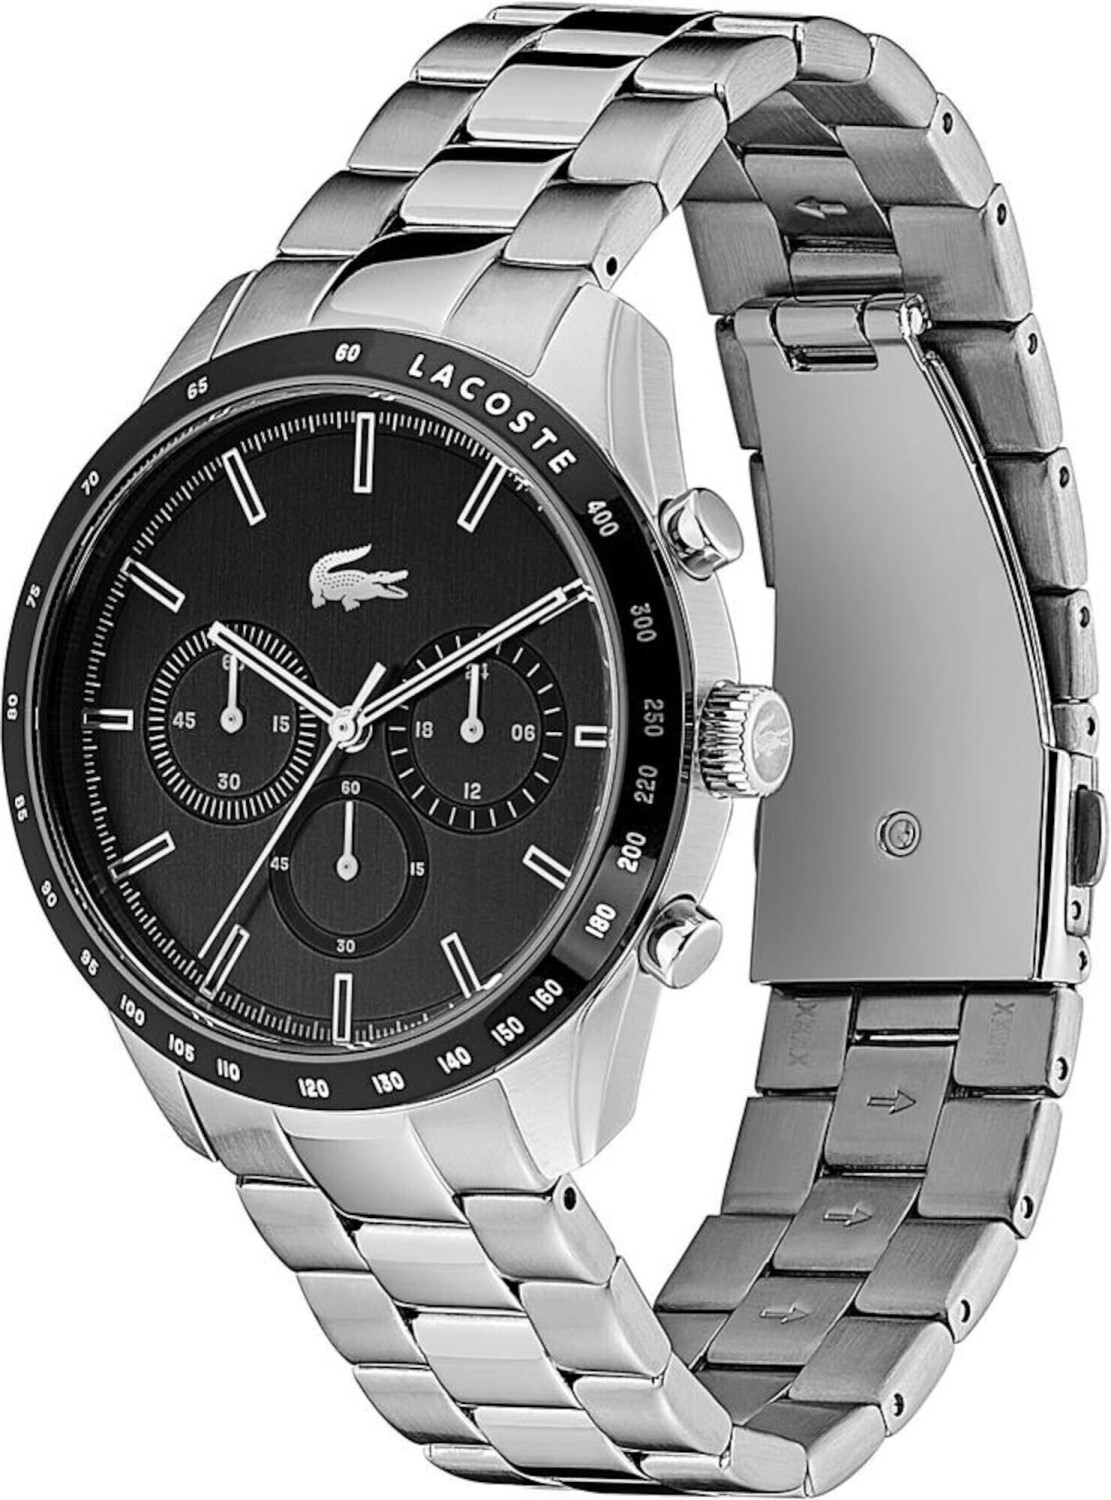 £122.42 (Today) Chronograph Buy – Boston Deals Best on from Lacoste